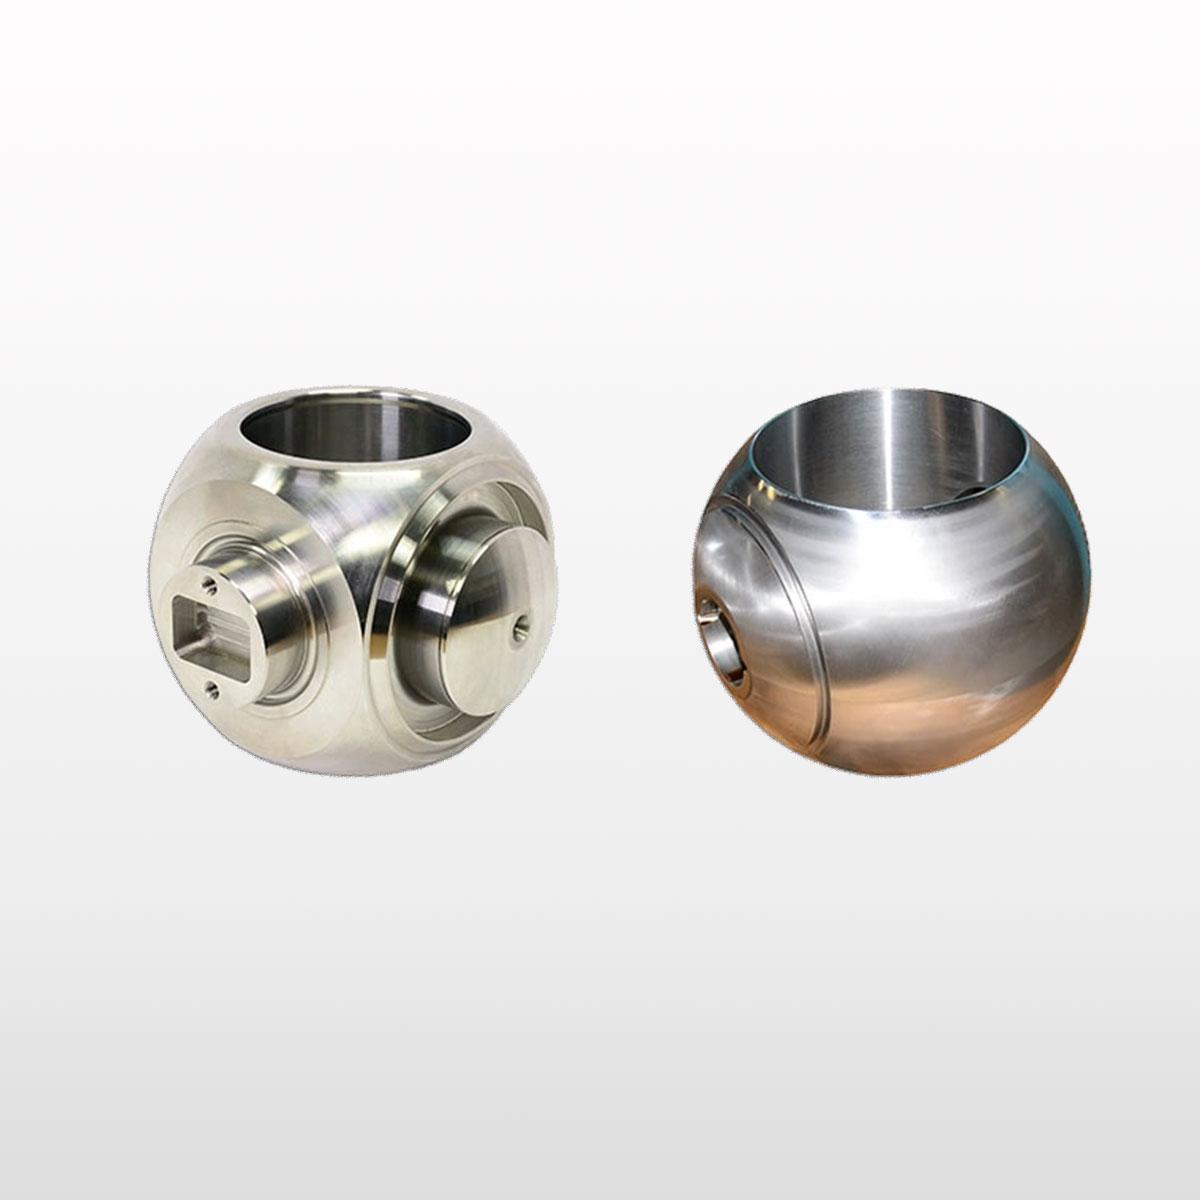 Different views of the Trunnion Valve Ball from AlterValve.